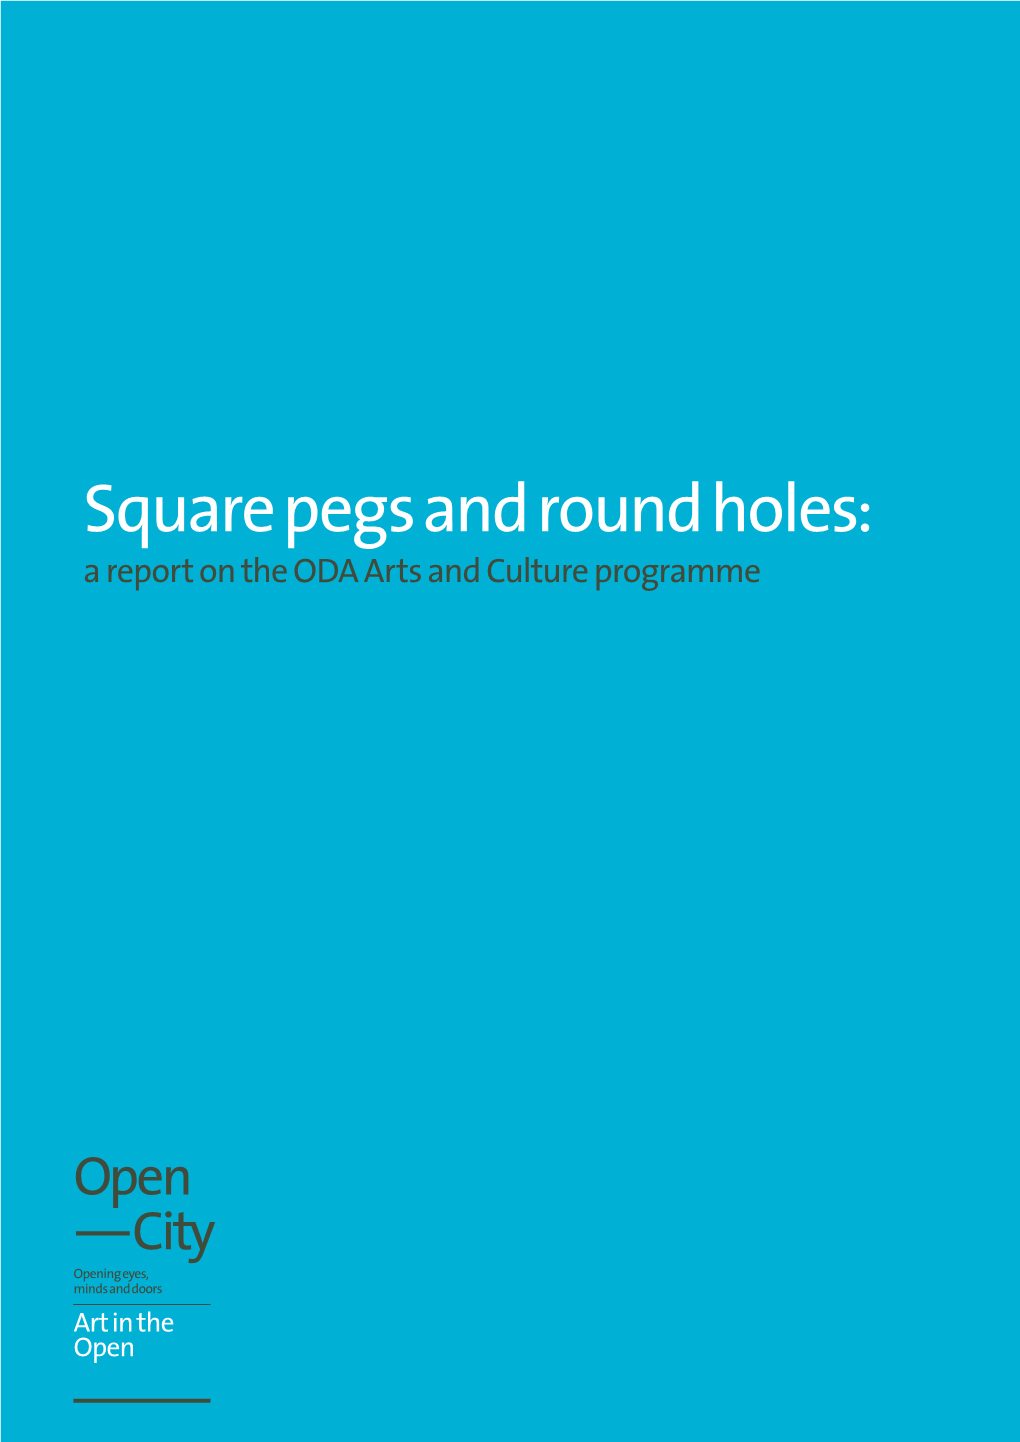 Square Pegs and Round Holes: a Report on the ODA Arts and Culture Programme